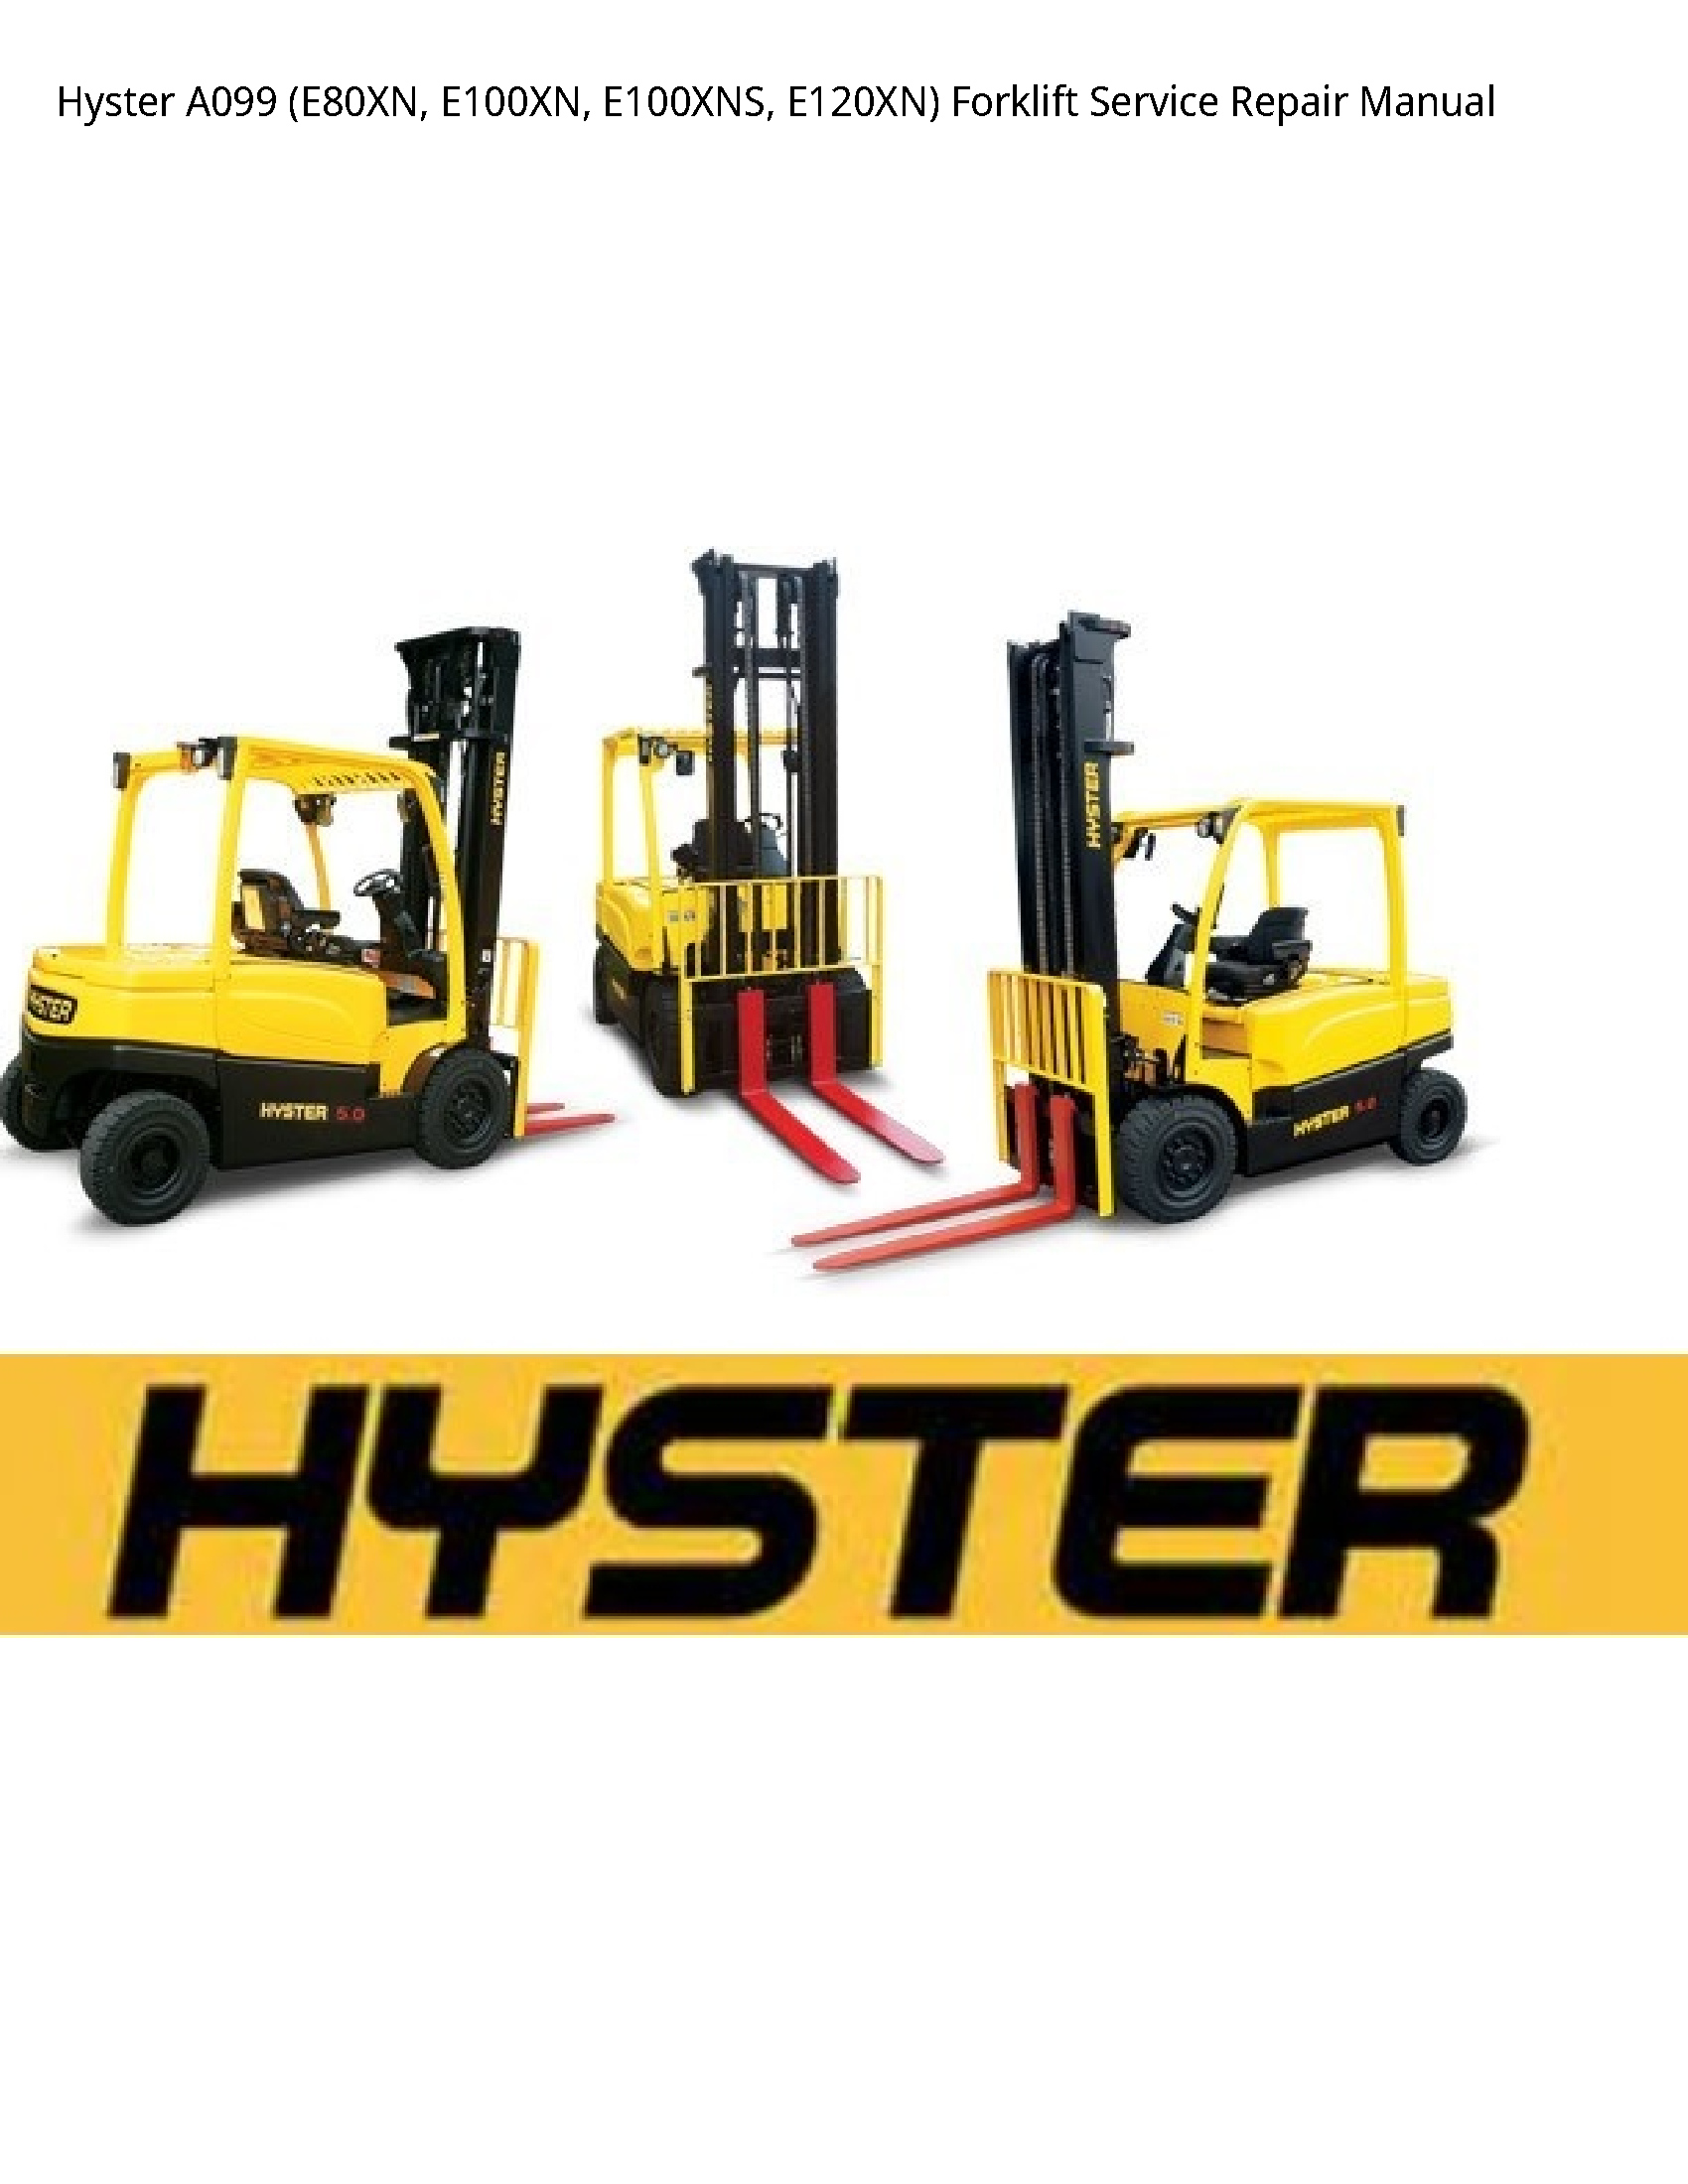 Hyster A099 Forklift manual